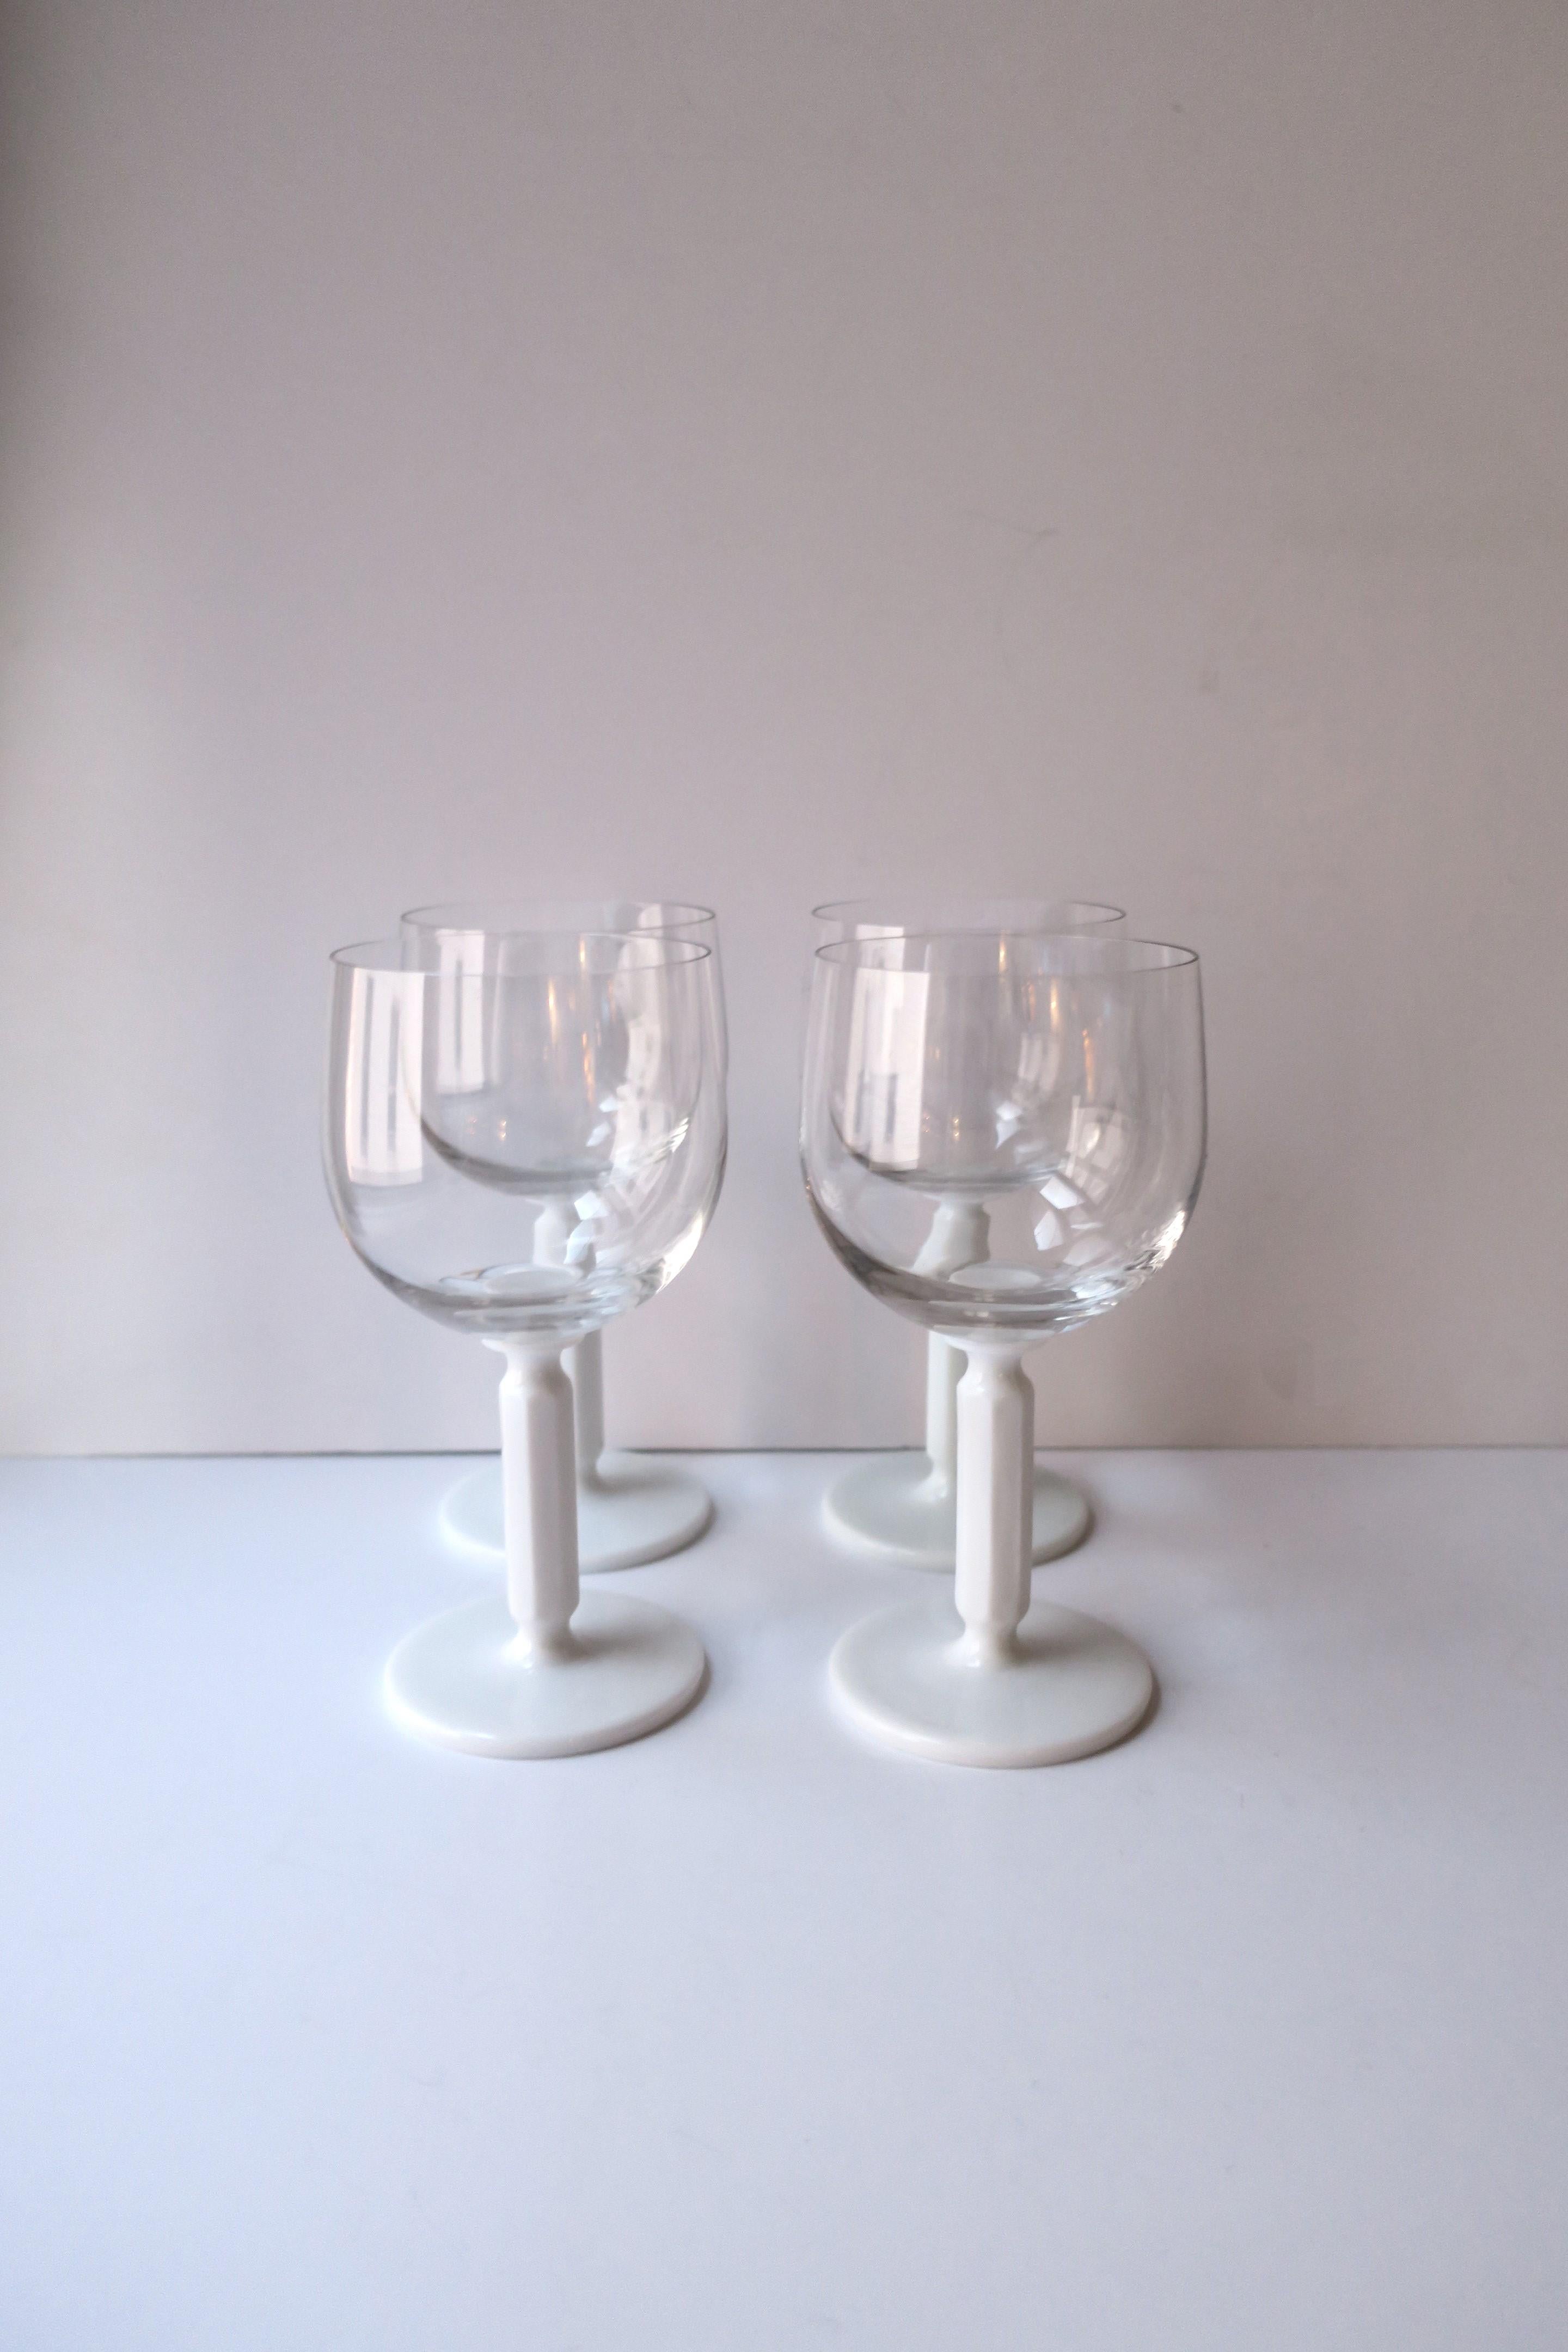 German Rosenthal Studio-Line Wine or Cocktail Glasses with White Glass Stem, Set of 4 For Sale